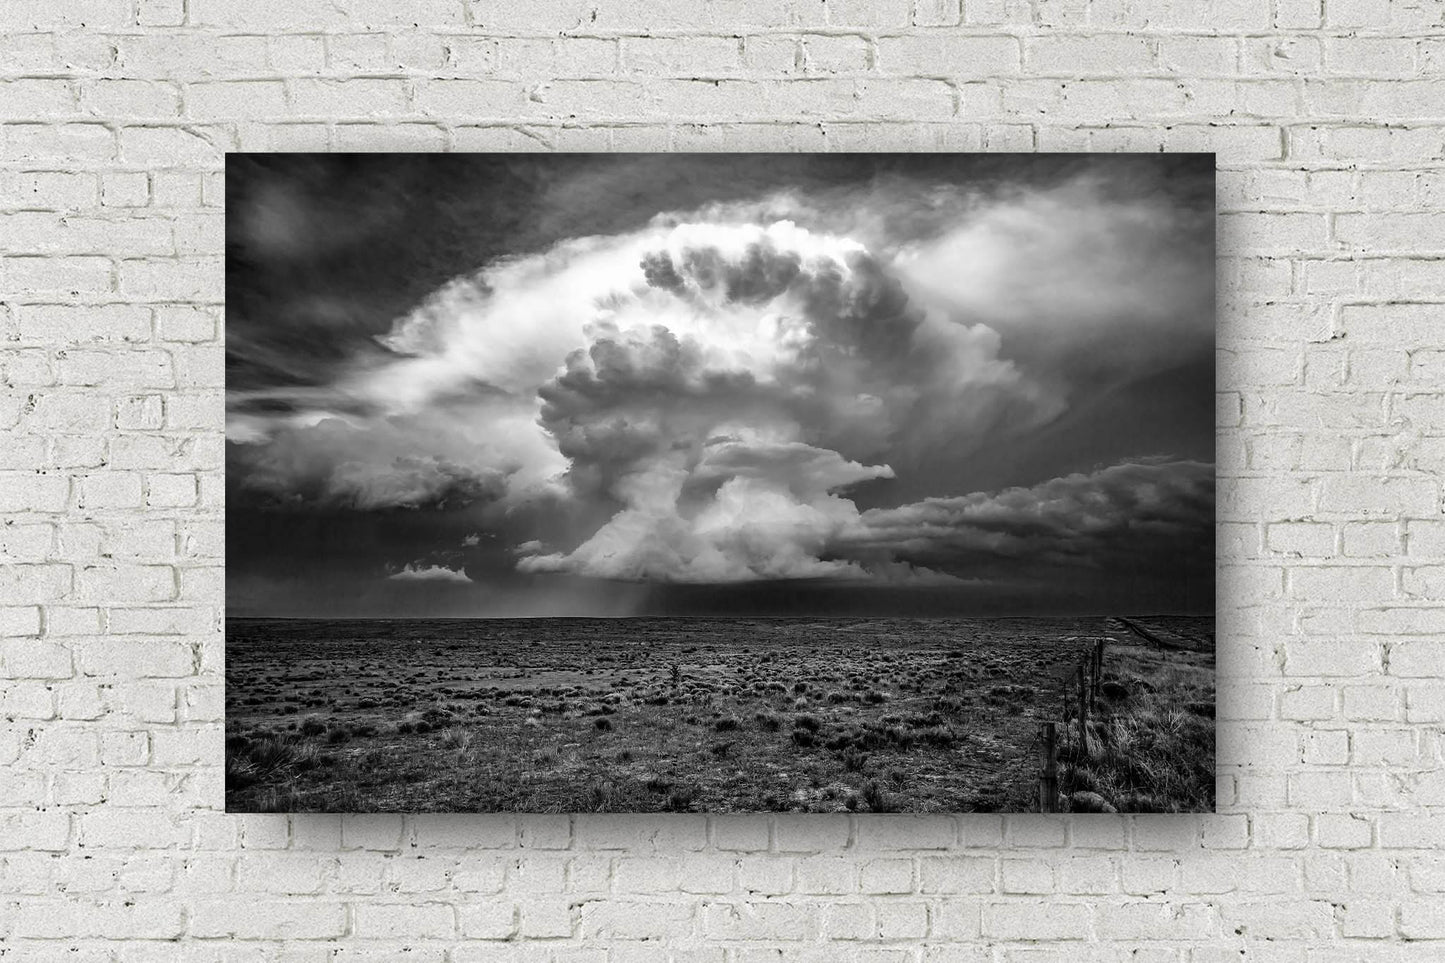 Black and White storm metal print of a supercell thunderstorm over the high plains of the Oklahoma panhandle by Sean Ramsey of Southern Plains Photography.